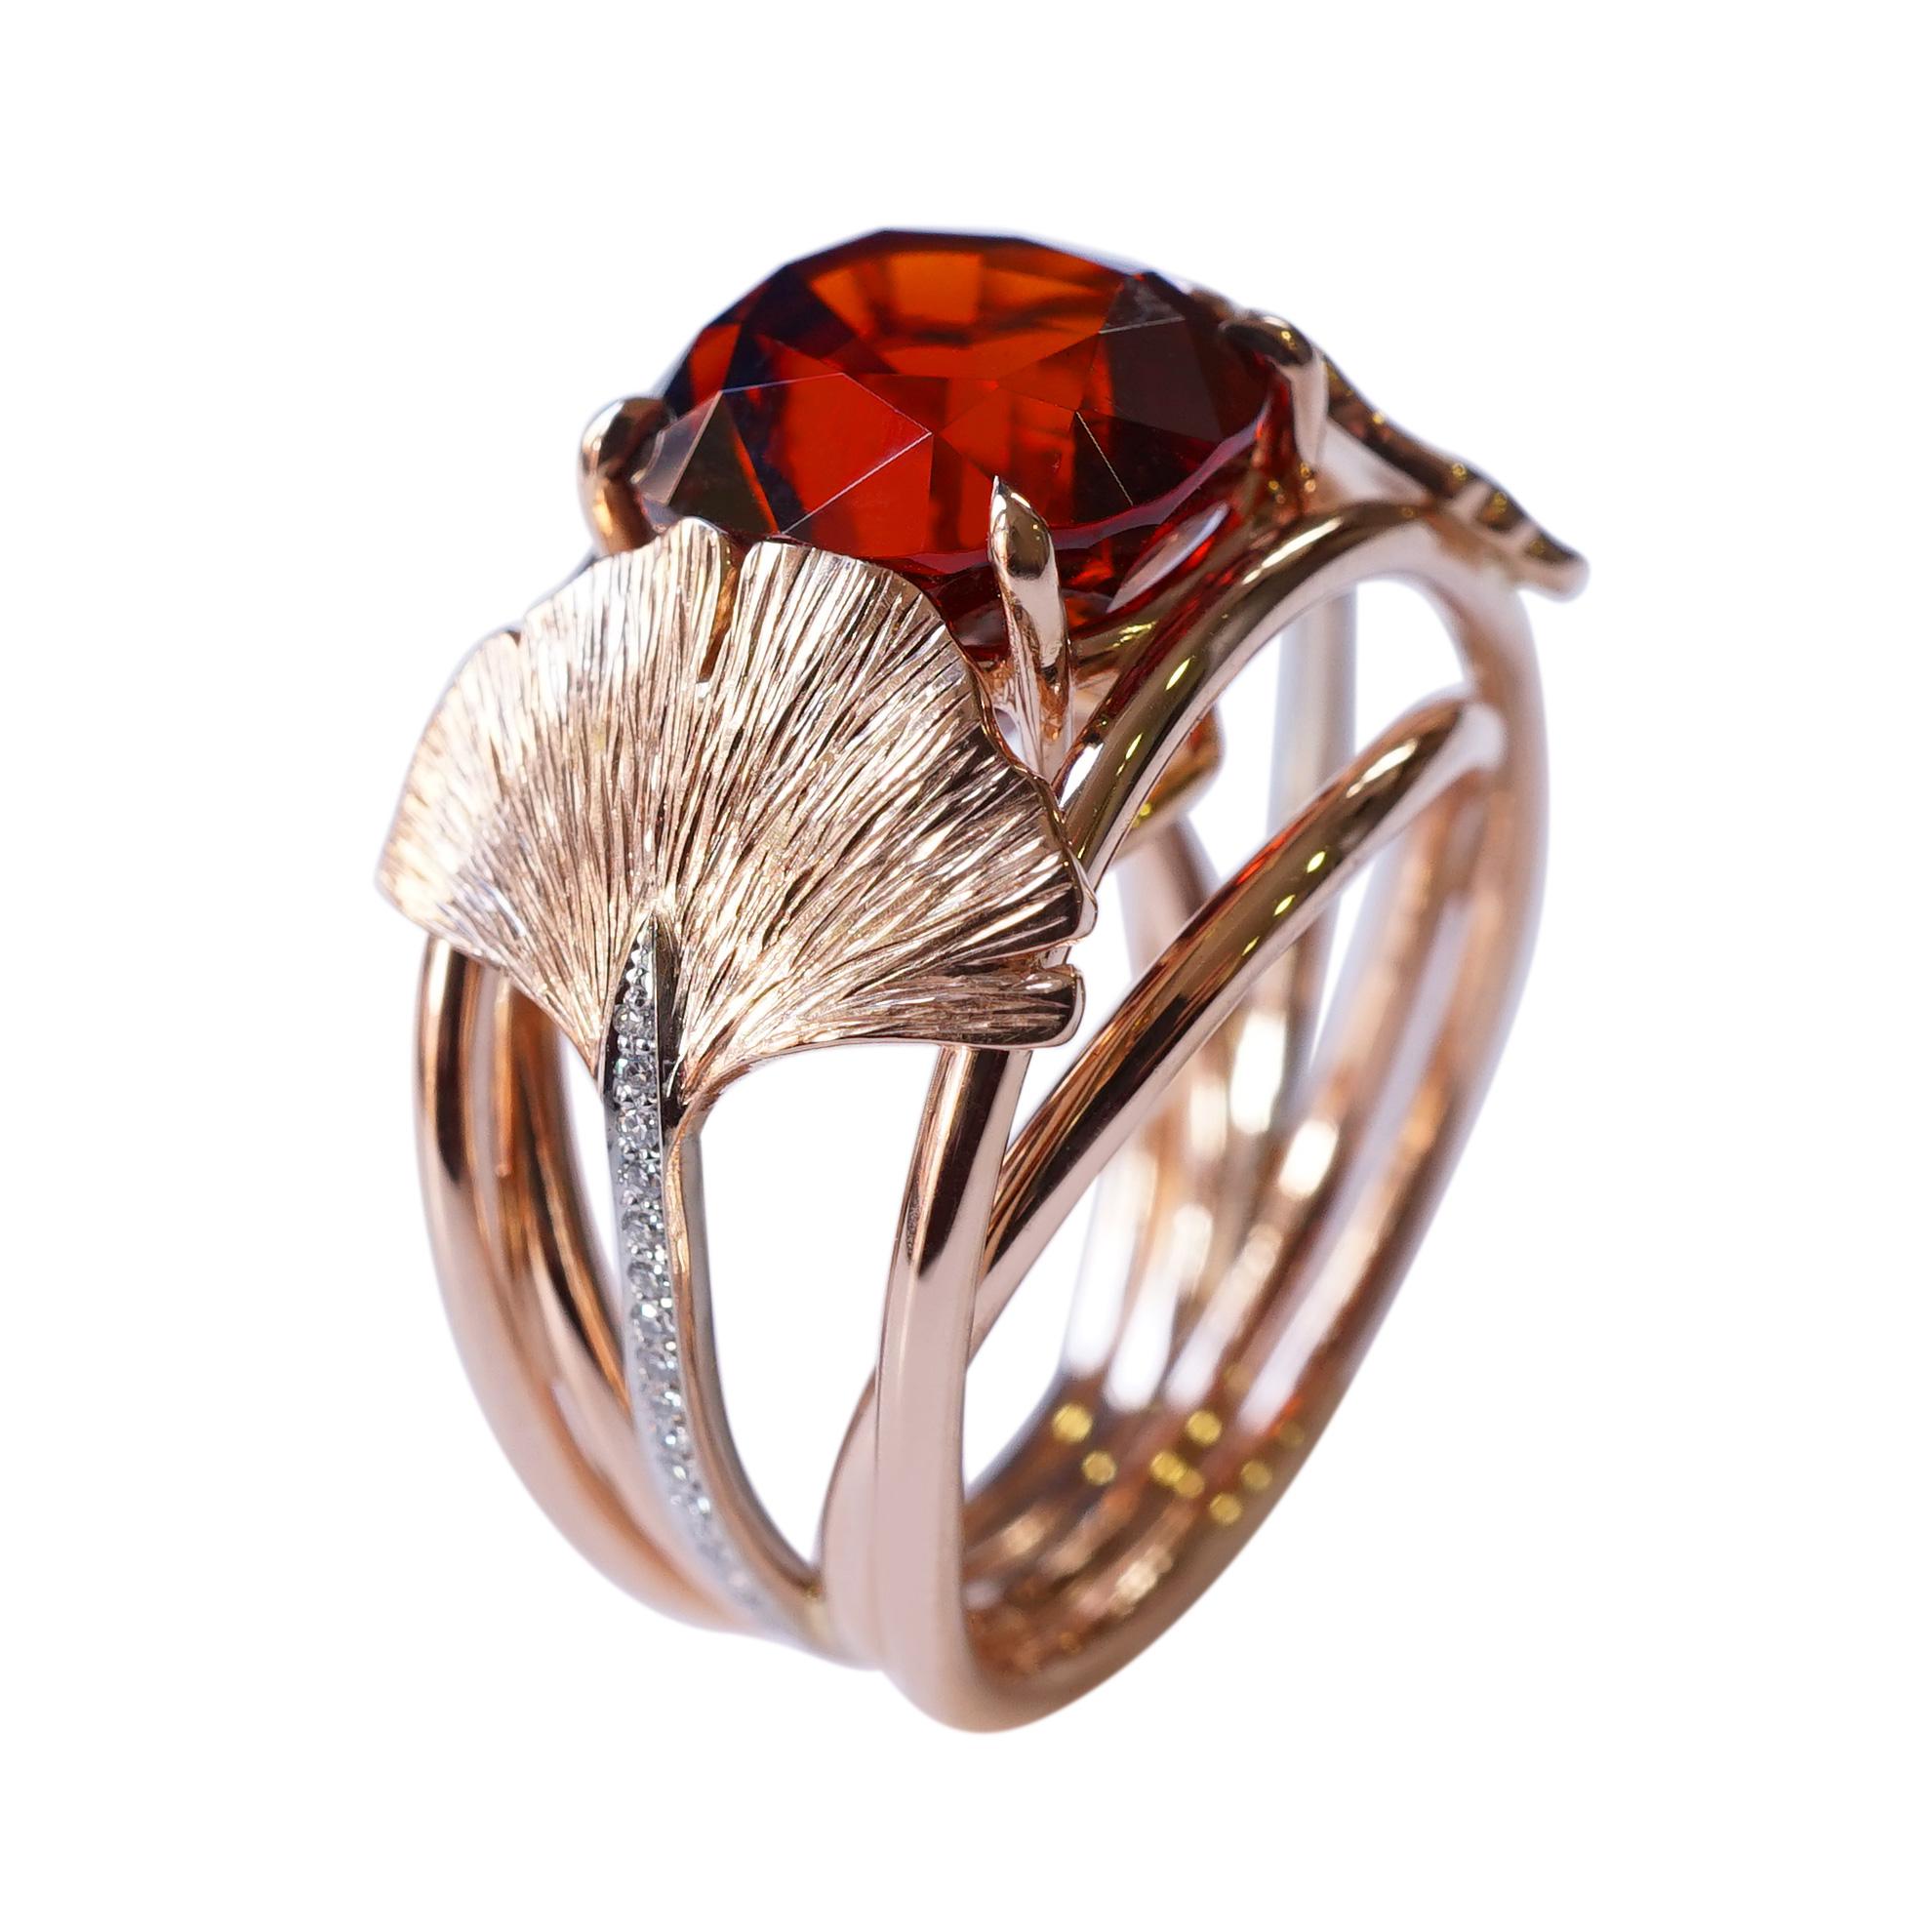 Pink Gold 18k With Red Garnet Diamonds And Gingko Leaves Botanical Ring For Sale